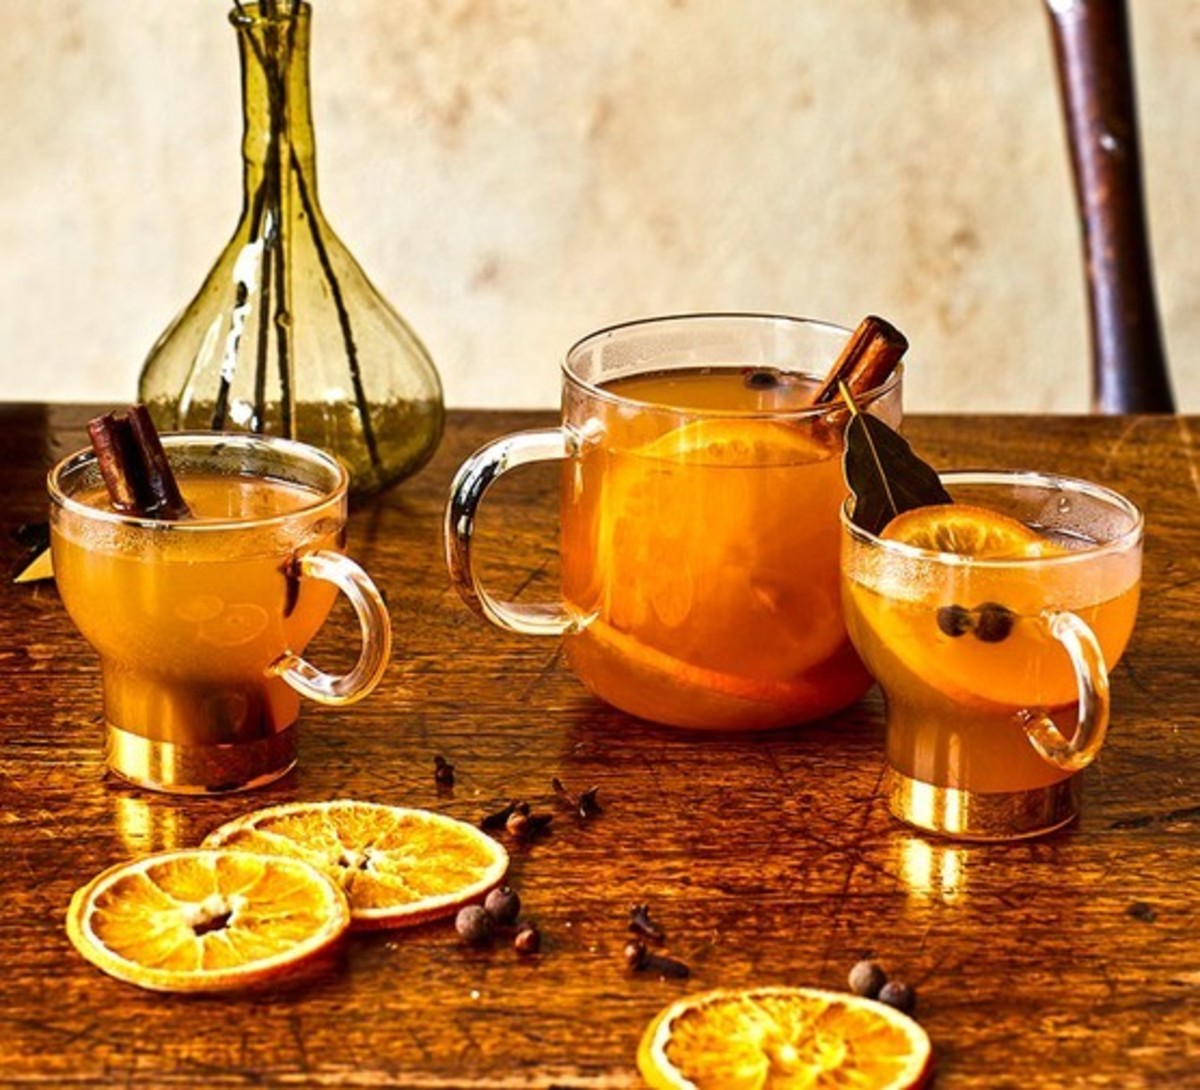 Medieval apple cider was made by using a fermented drink called dépense 